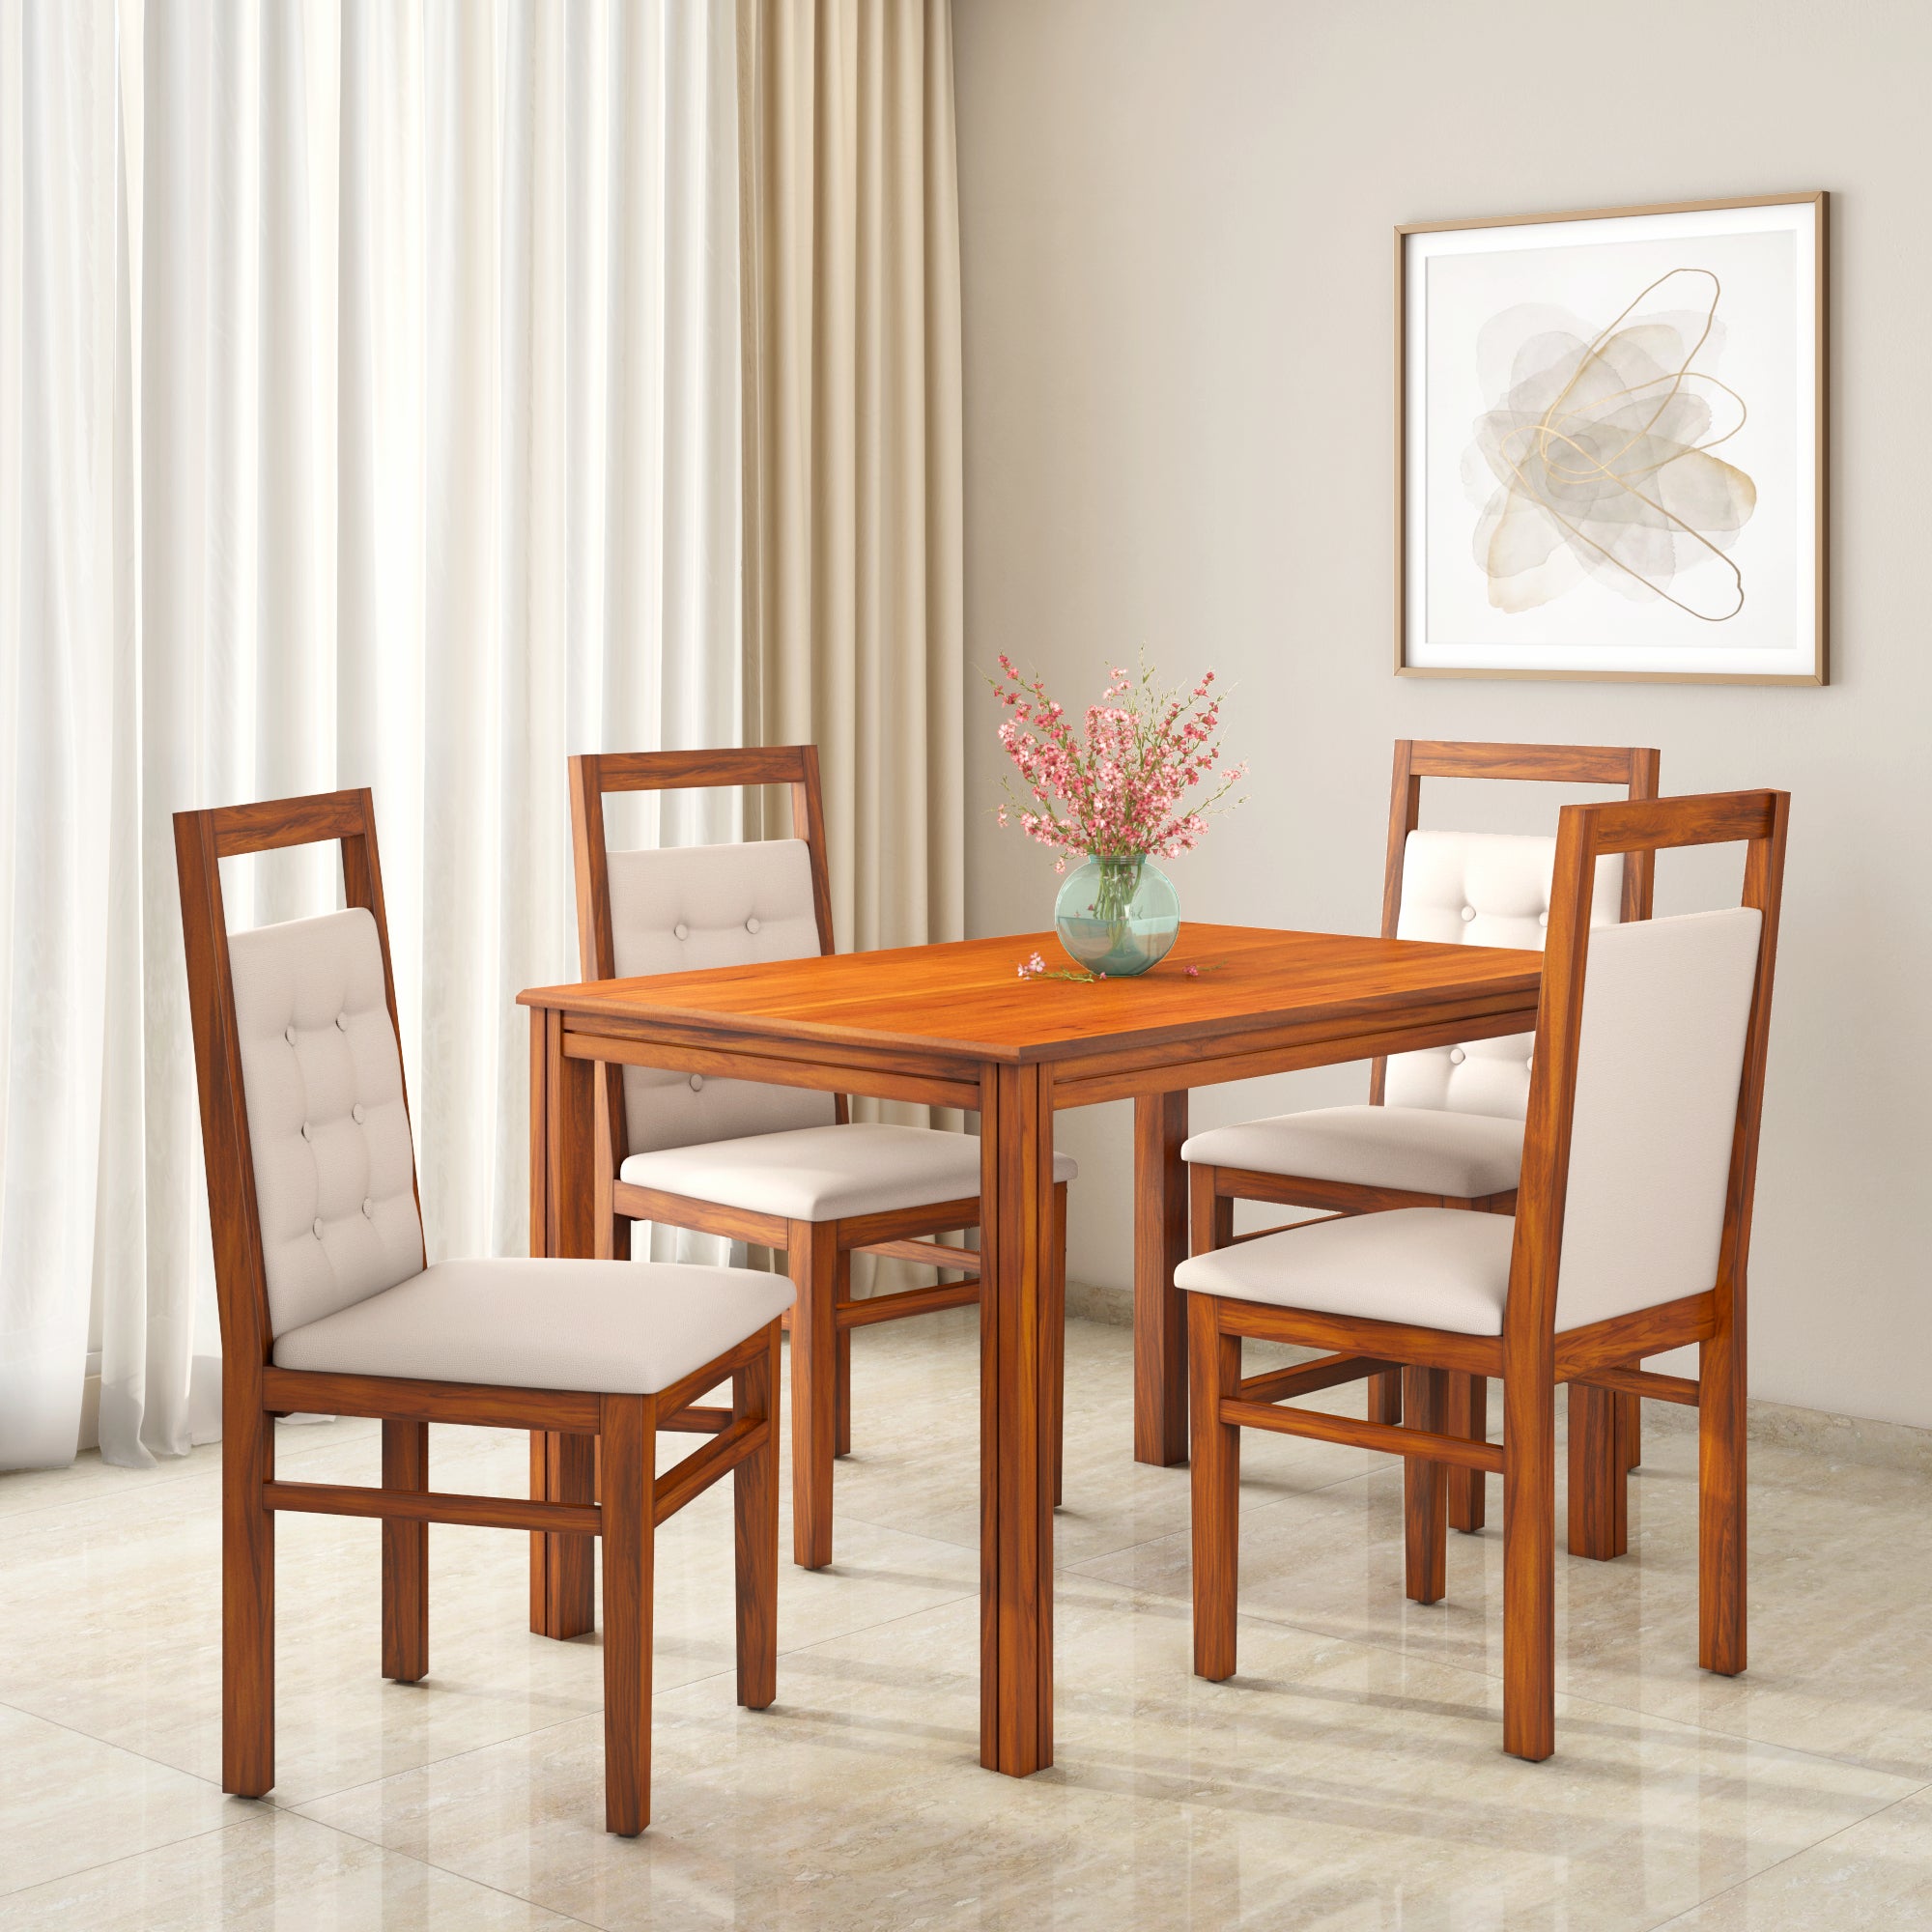 Vera 4 Seater Solid Wood Dining Set With Chairs in Honey Brown Finish